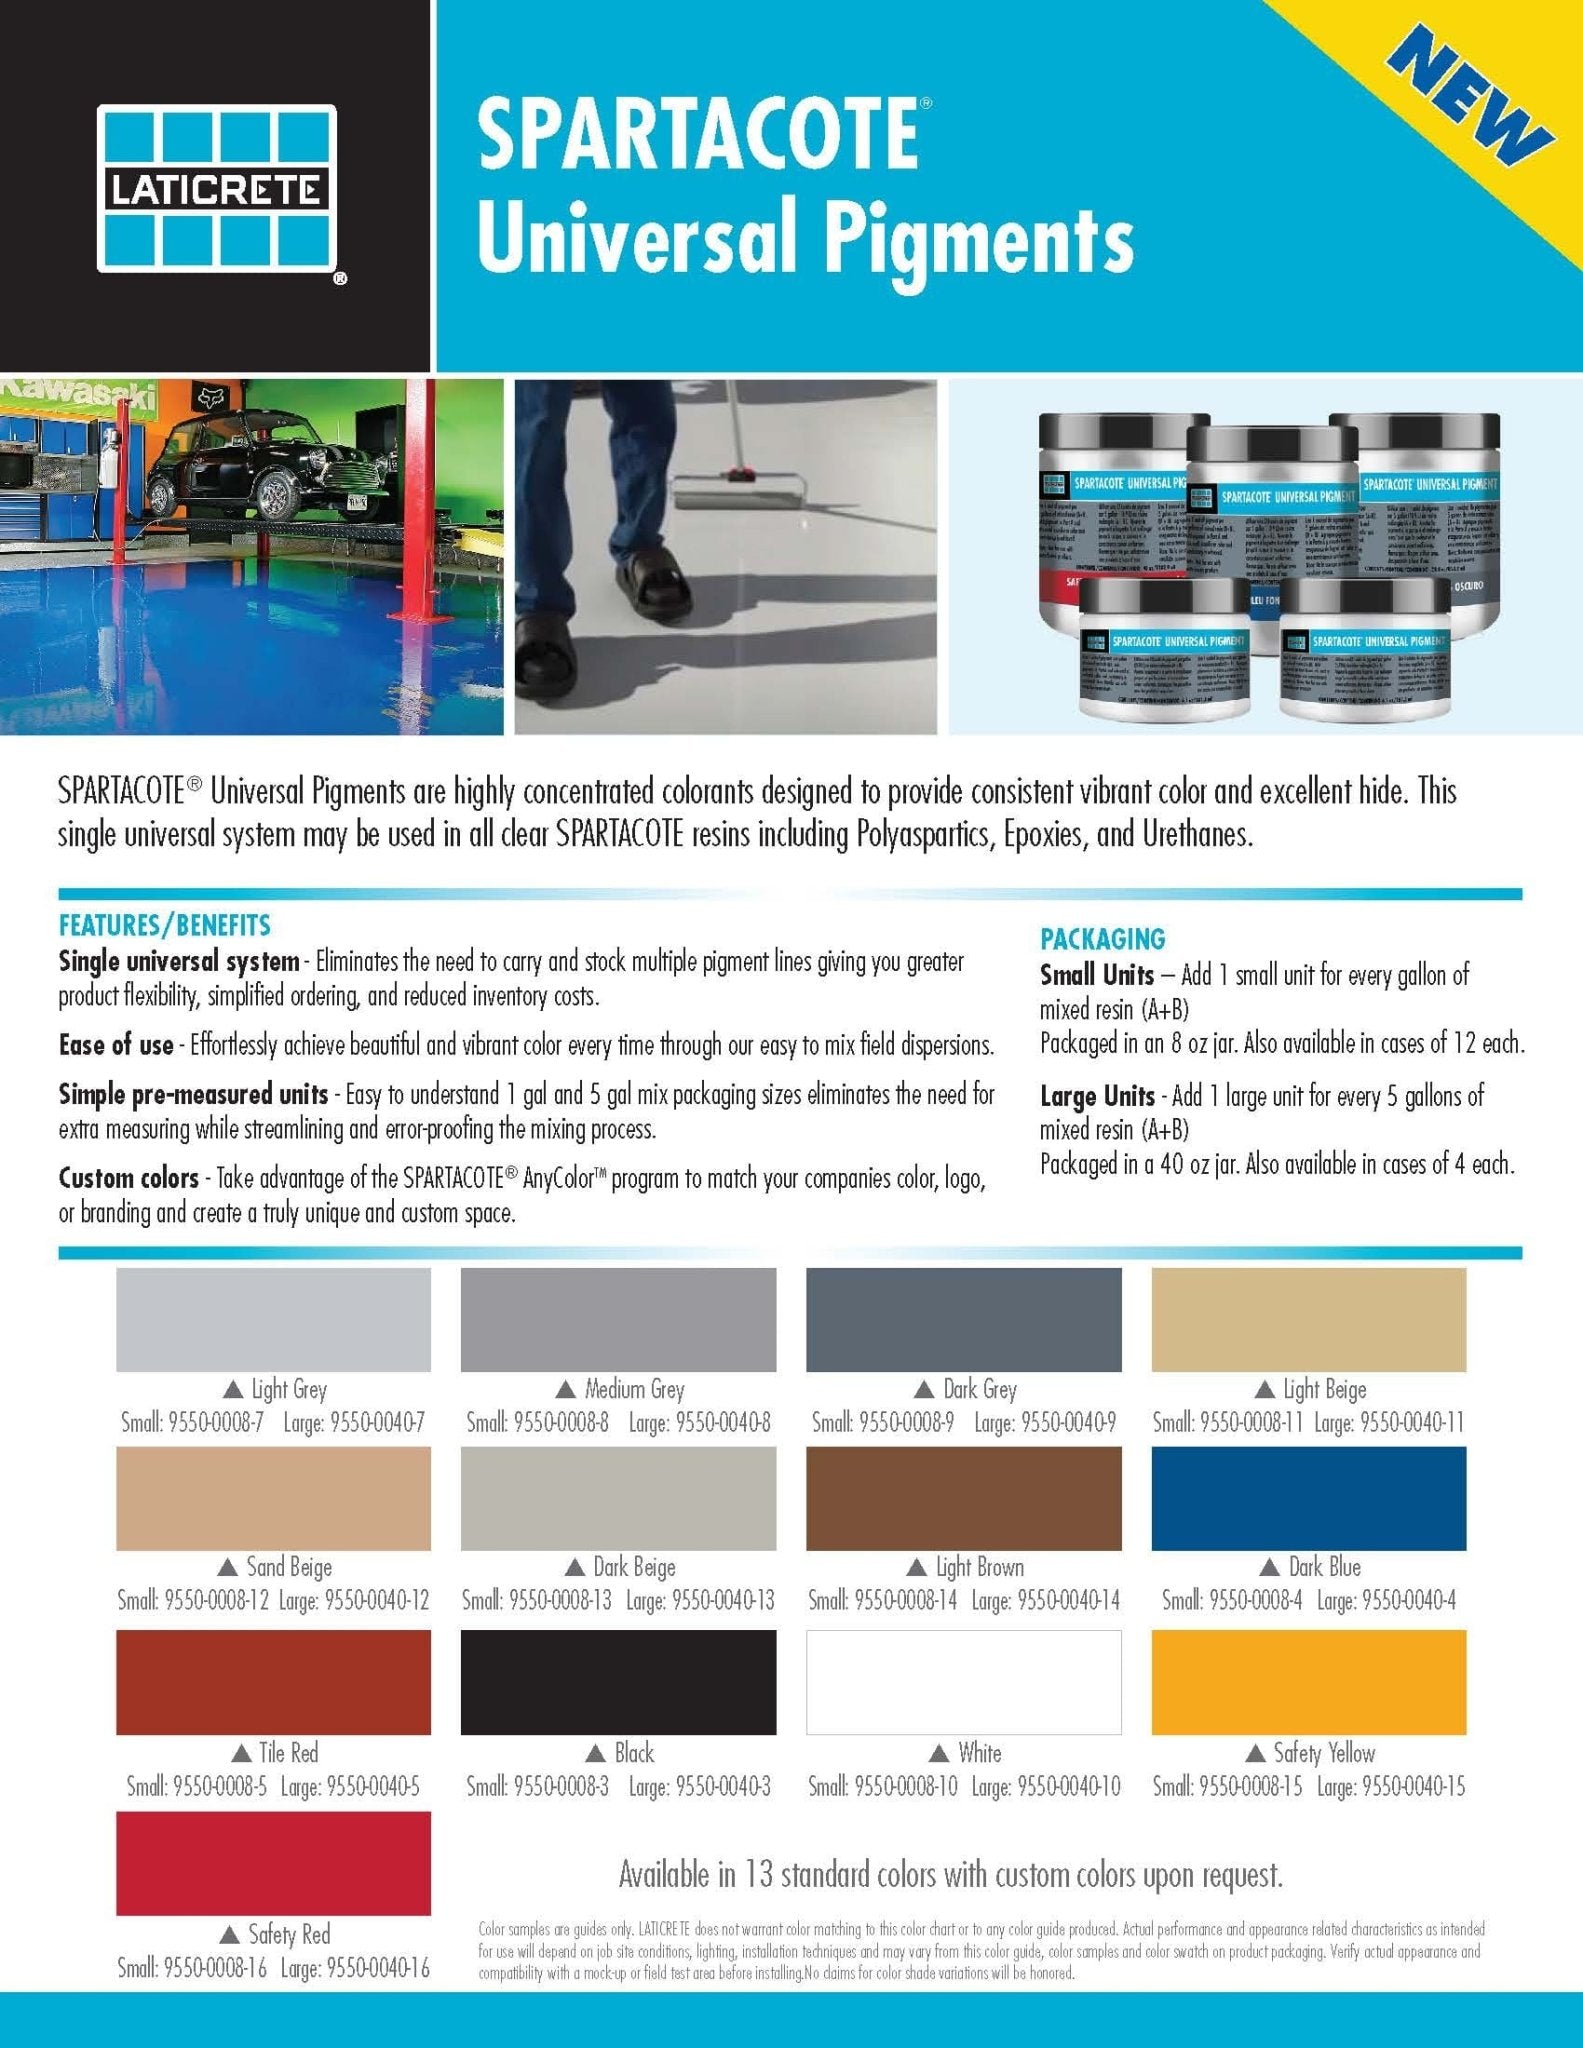 SPARTACOTE Universal Pigments - Xtreme Polishing Systems.